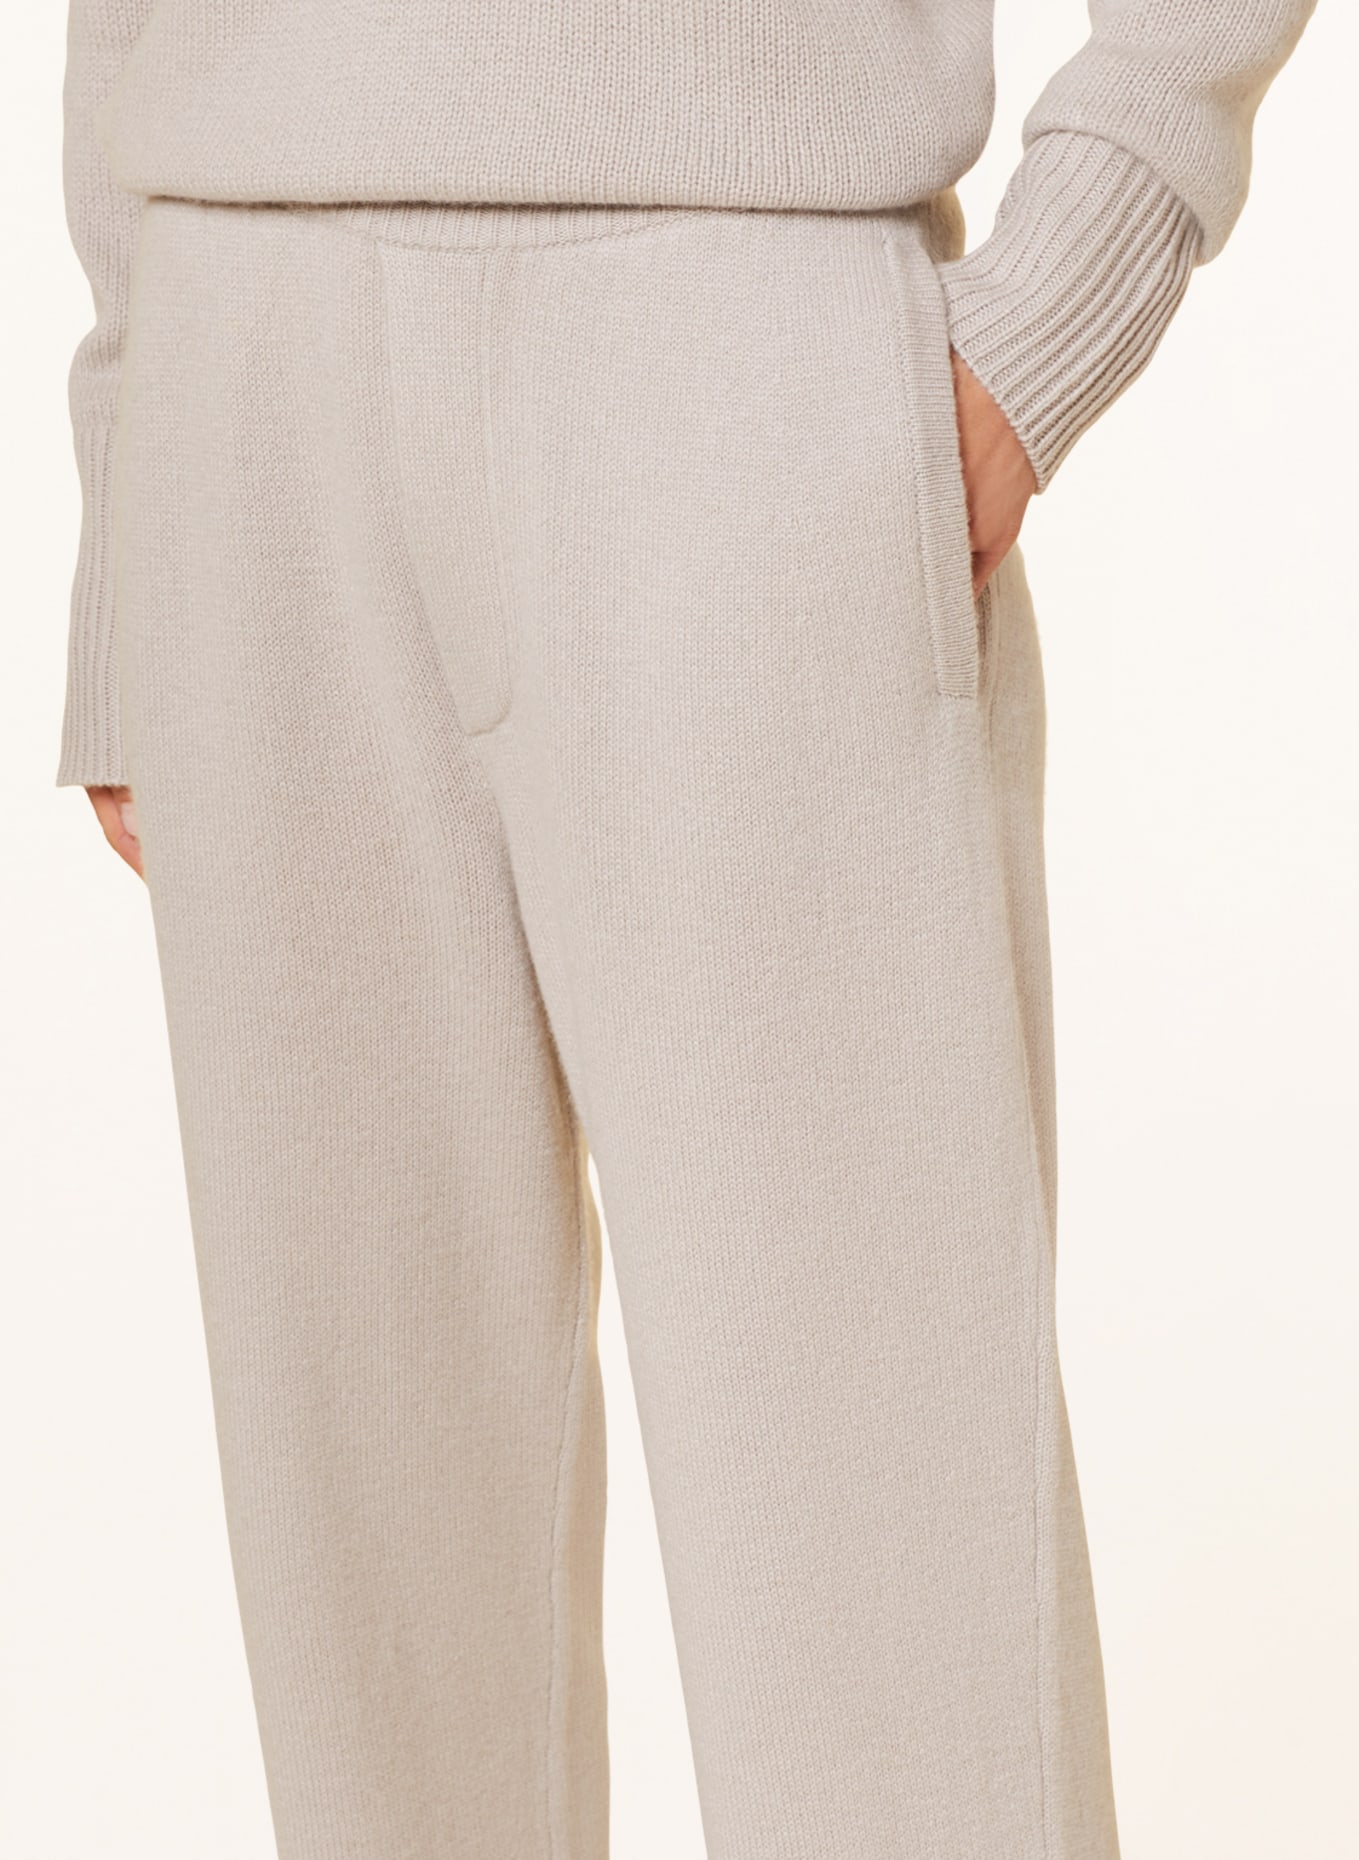 LISA YANG Knit trousers SUNDAY in jogger style in cashmere, Color: LIGHT GRAY (Image 5)